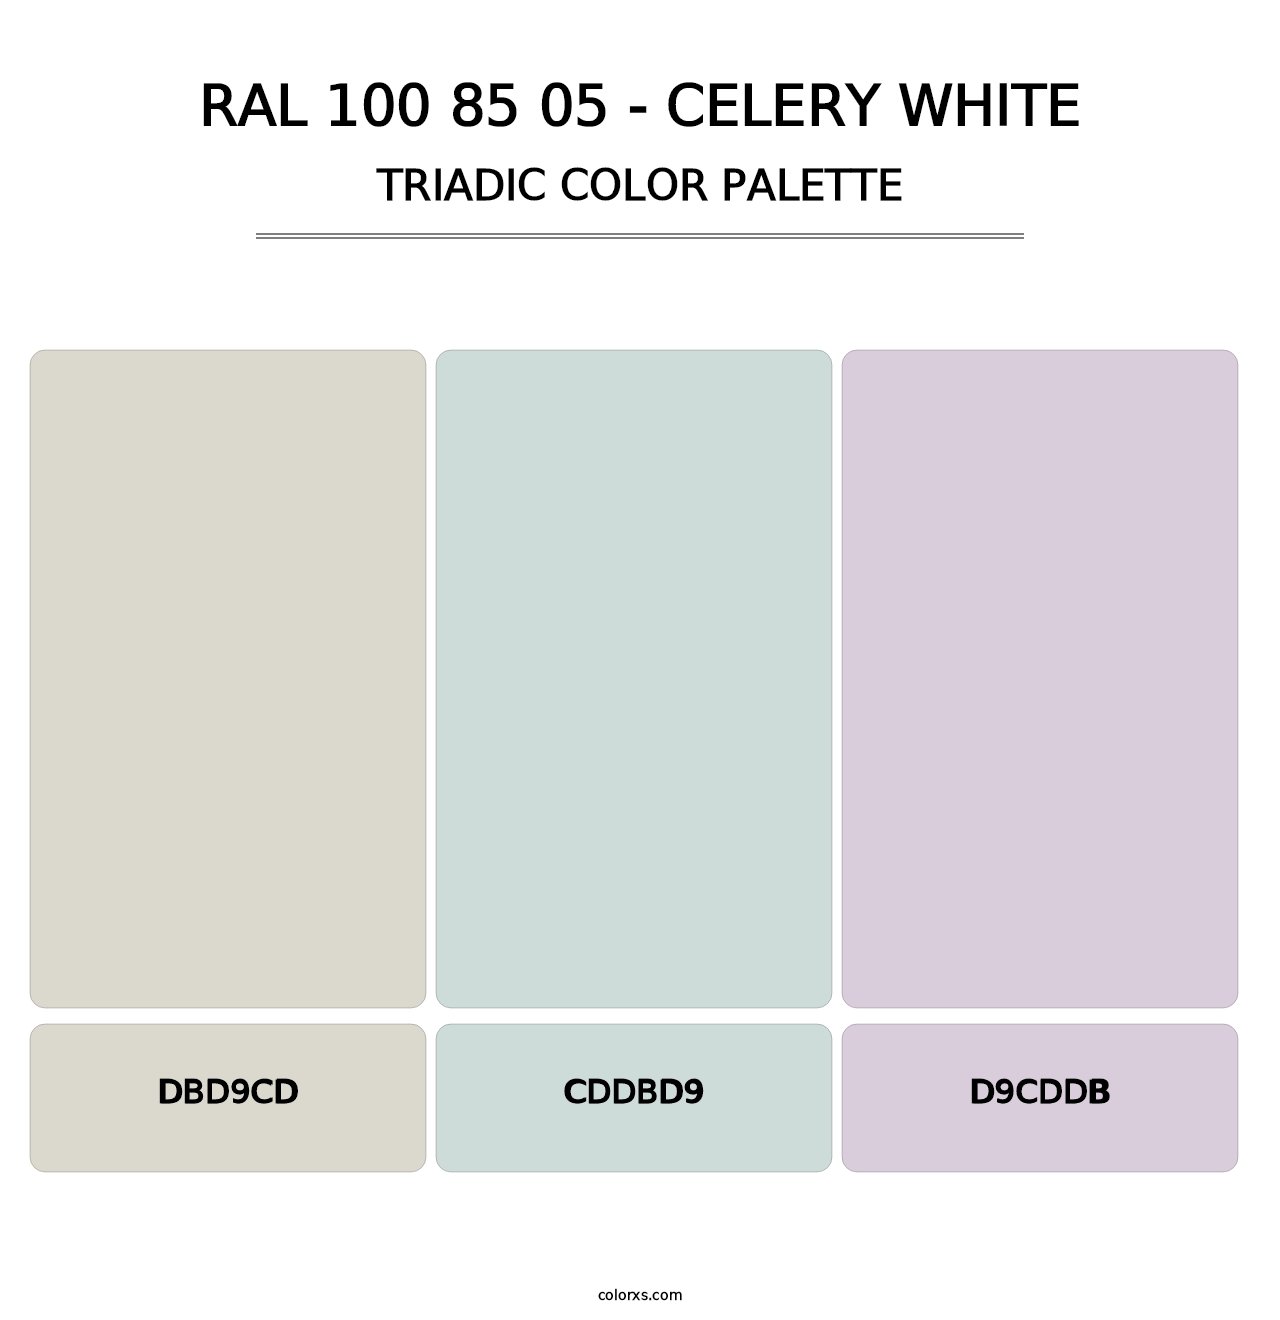 RAL 100 85 05 - Celery White - Triadic Color Palette